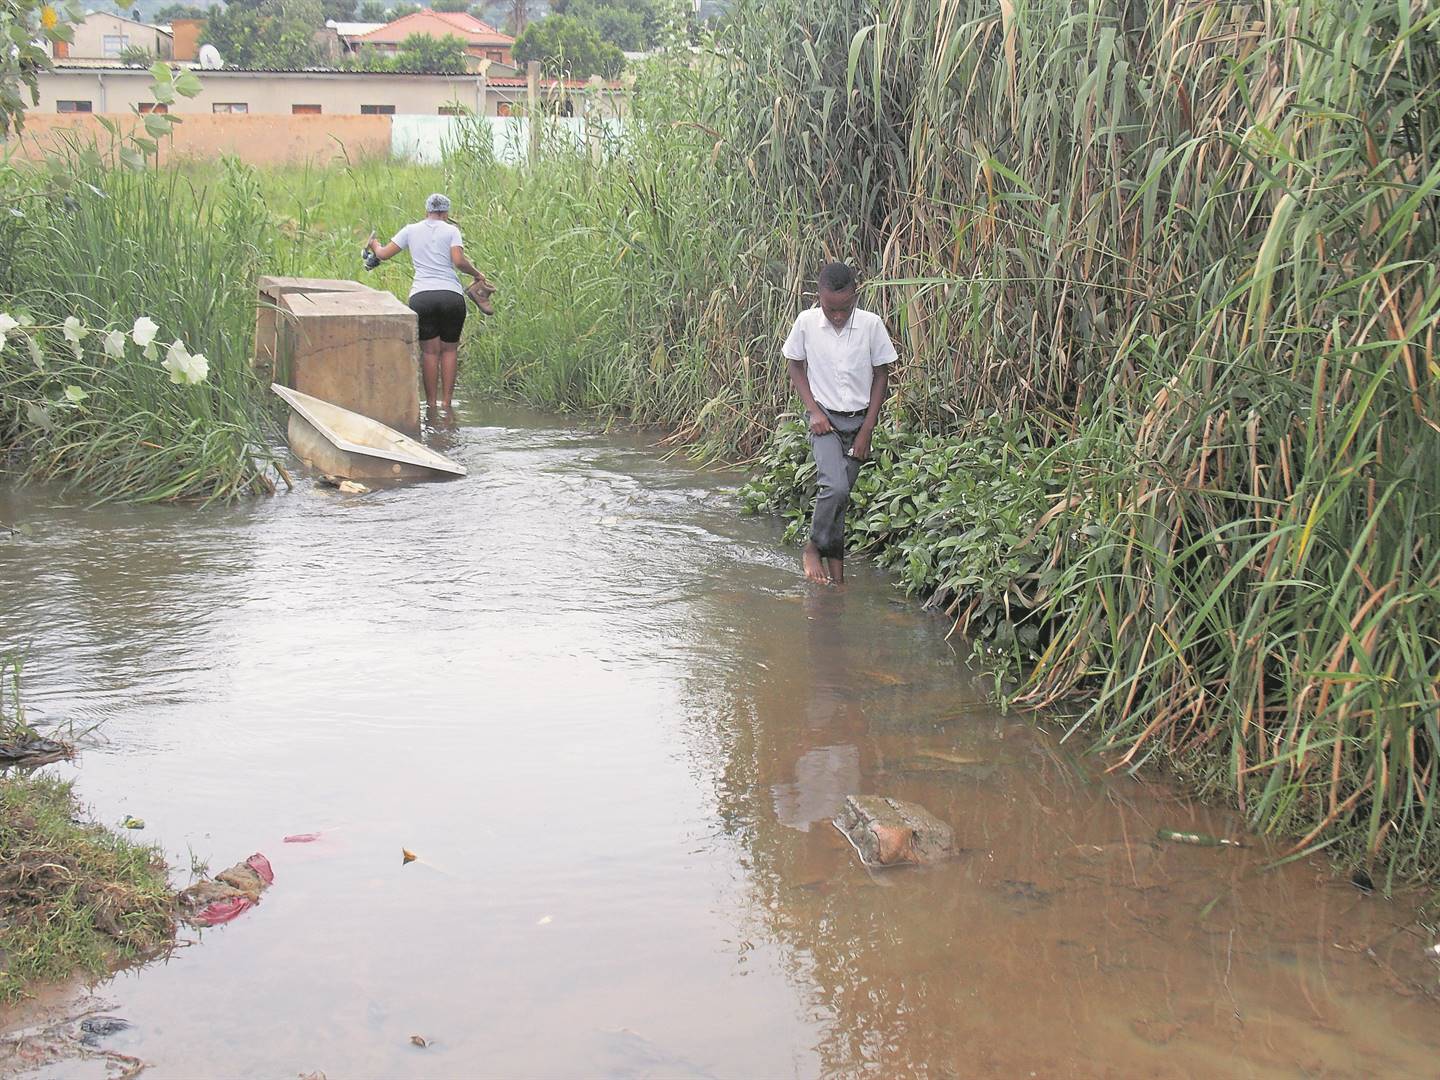 Pupils from Mamelodi extension 18 in Tshwane have to endure the hardship of crossing a stream.      Photo by Aaron Dube